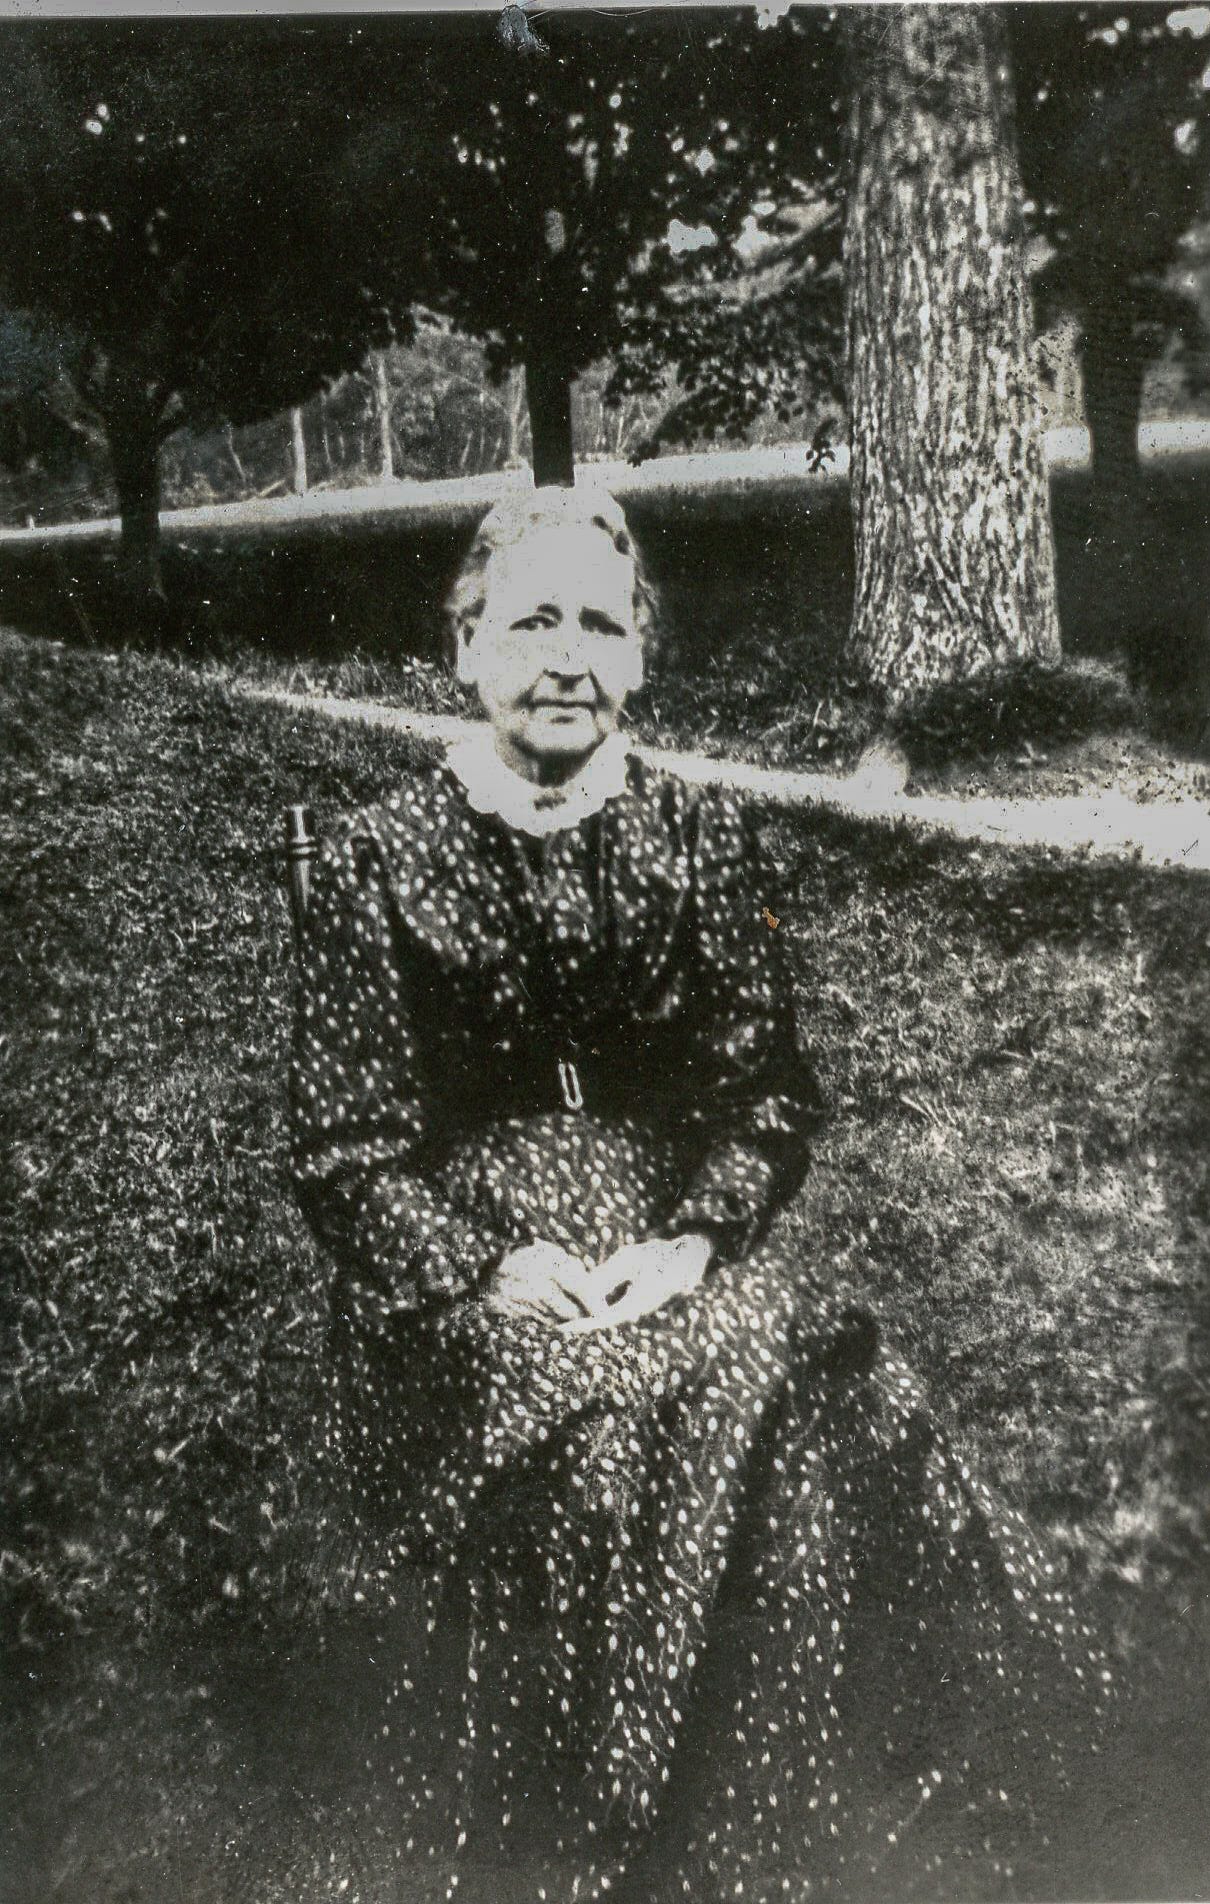 Woman in dress seated on a chair outside